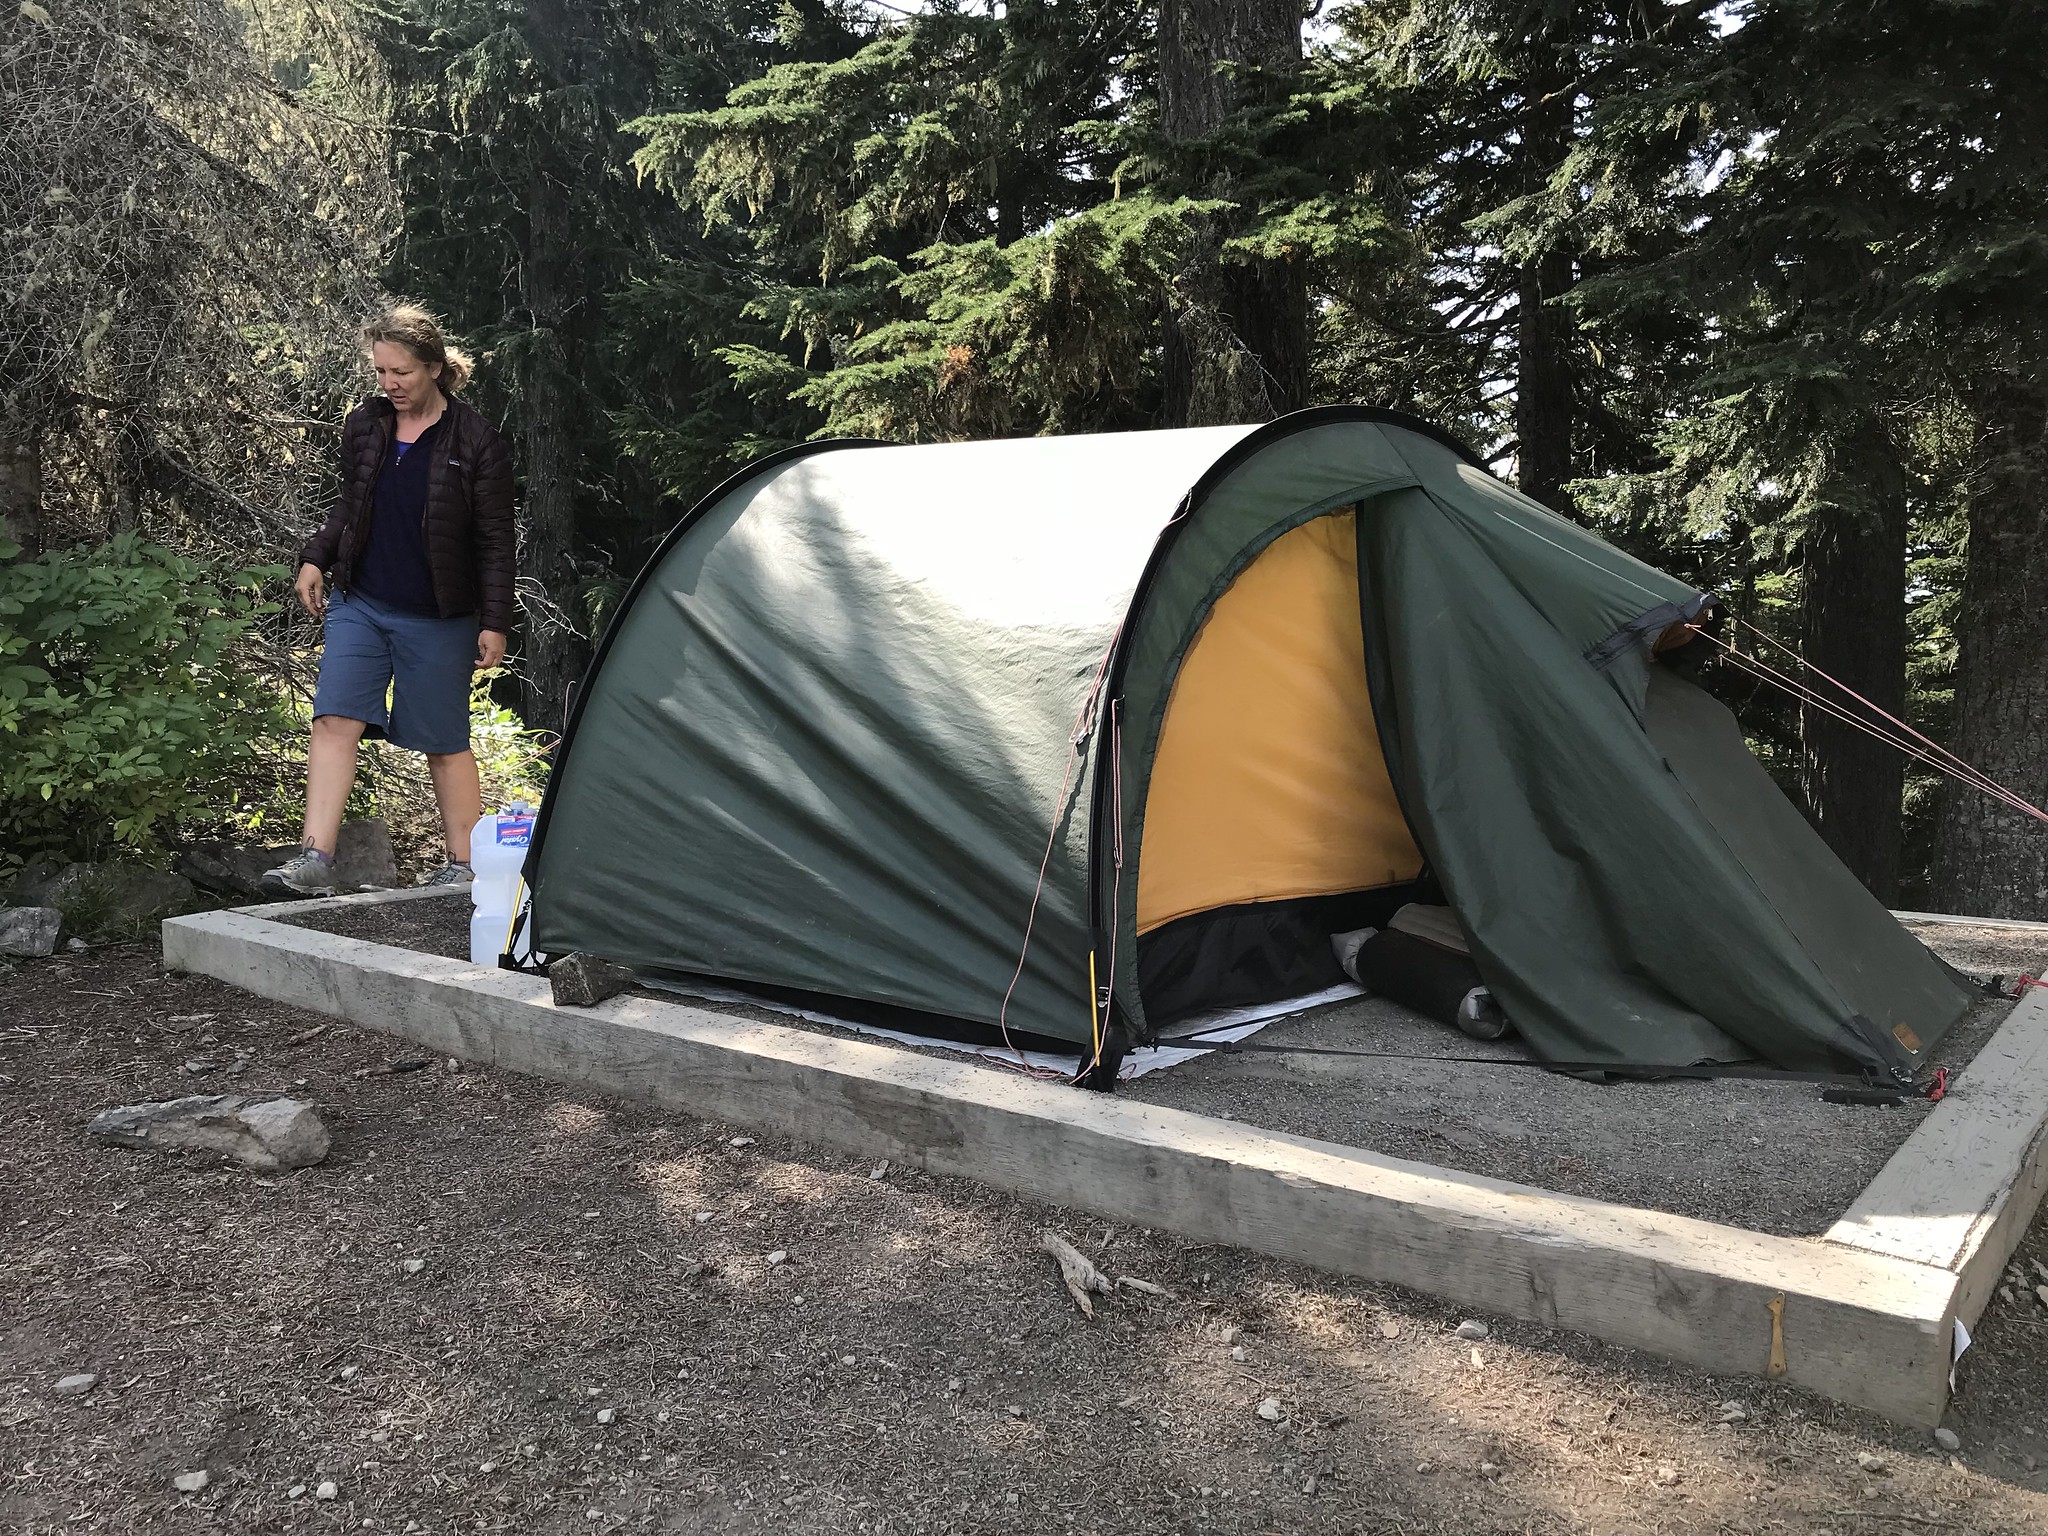 New site at Mowich Lake Campground